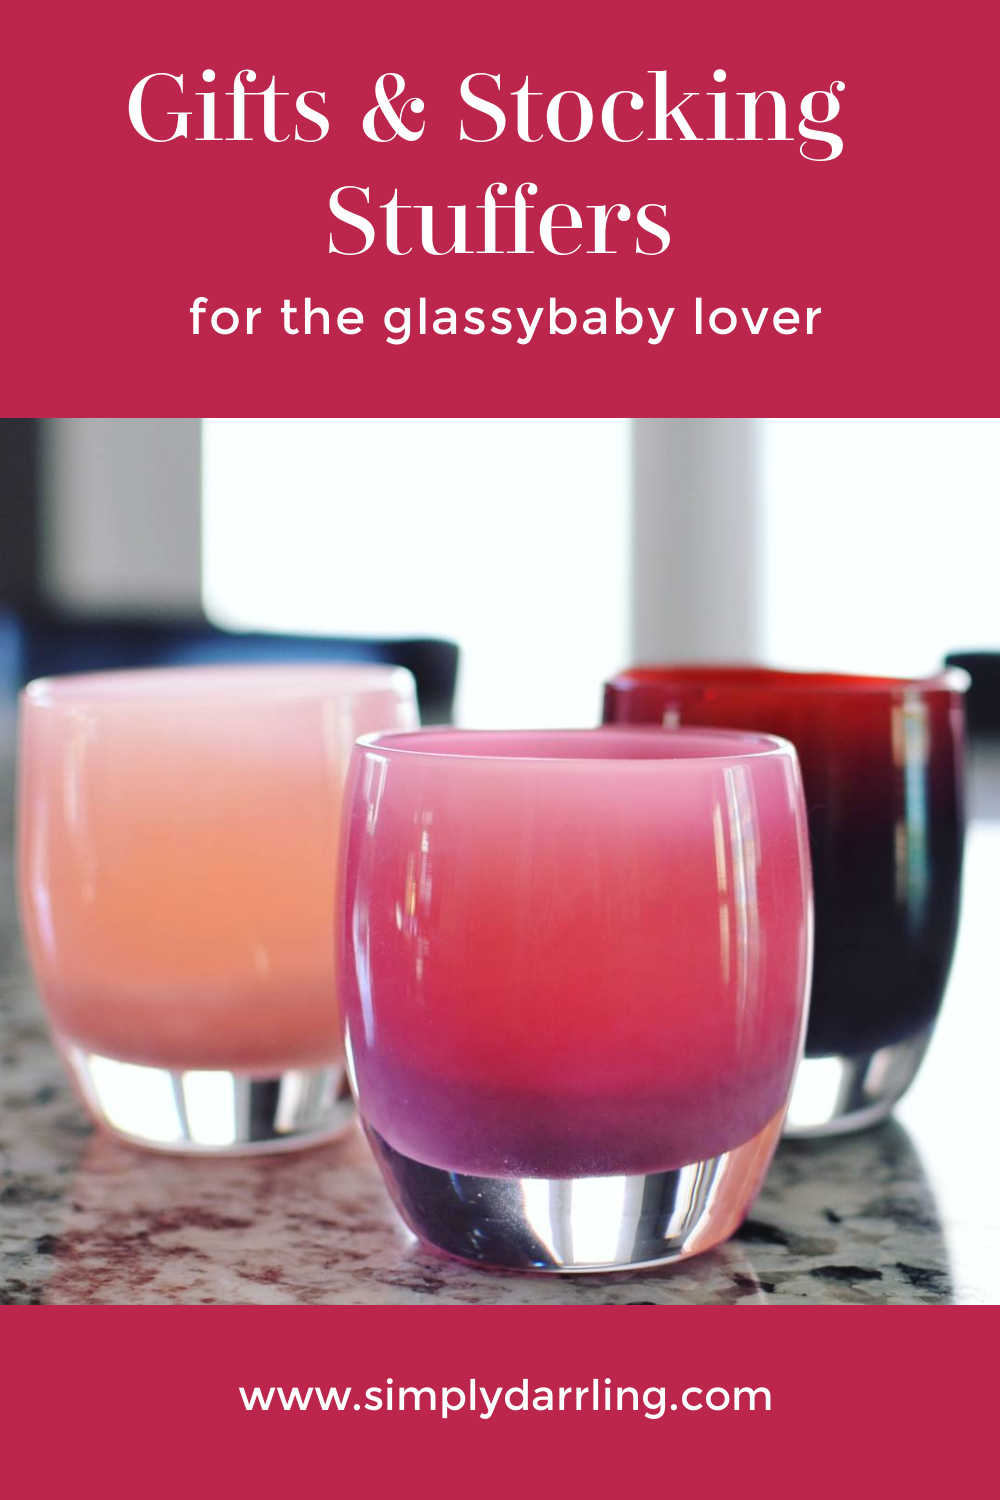 Glassybaby with text gifts and stocking stuffers